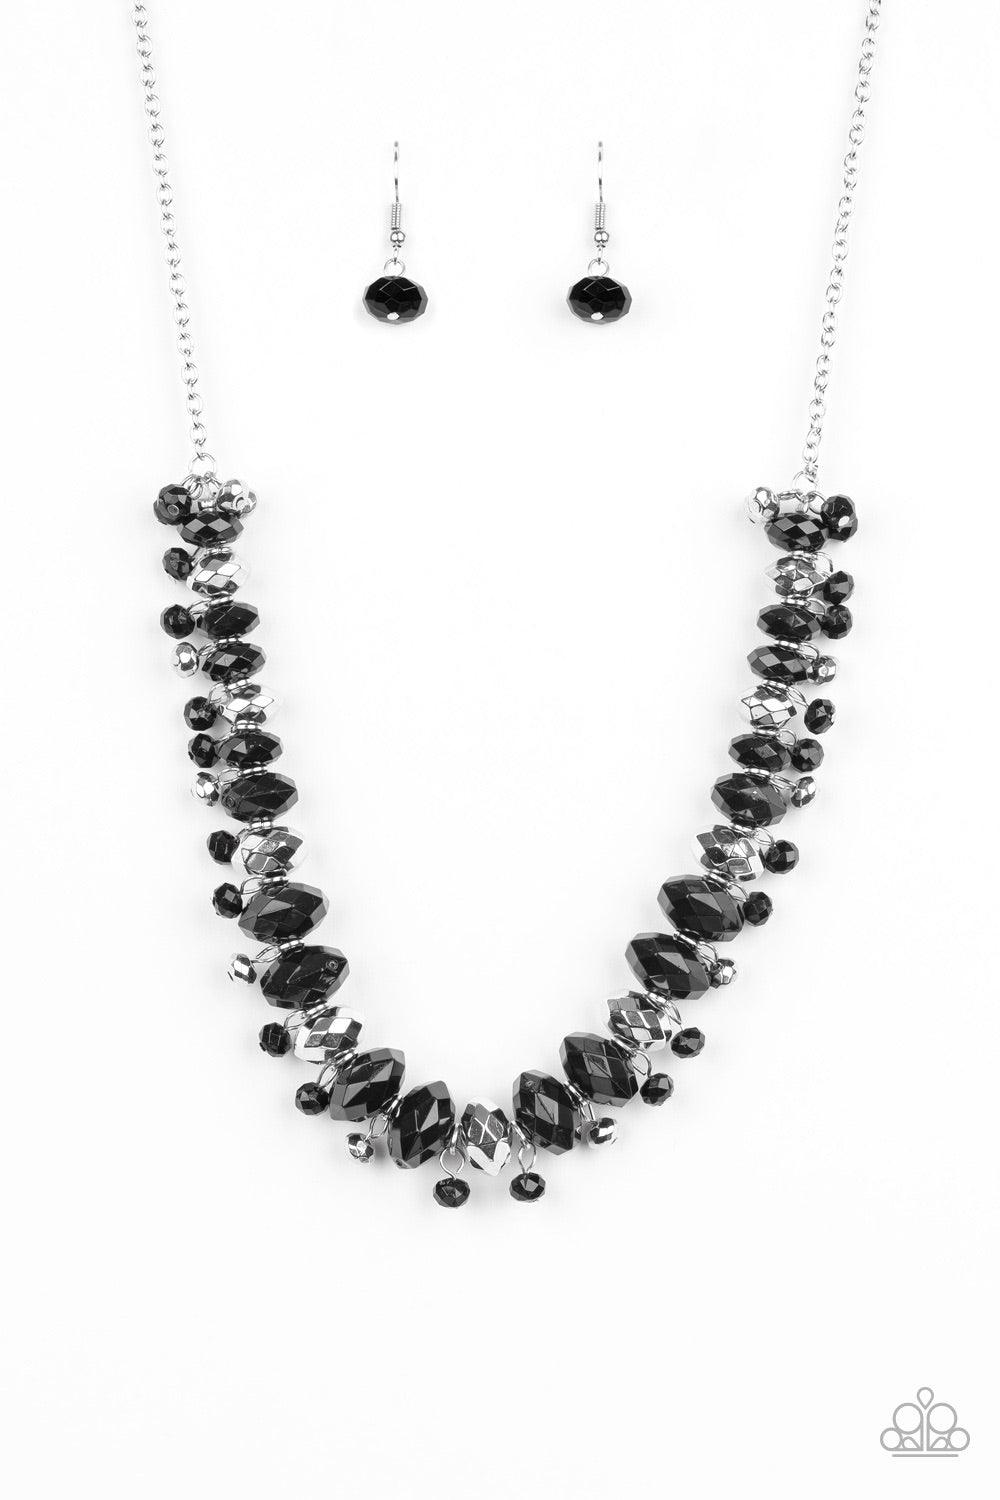 Paparazzi Accessories BRAGs To Riches - Black Faceted silver and black beads are threaded along an invisible wire below the collar. Dainty silver and black beads dangle from the colorful combination, creating an edgy fringe. Features an adjustable clasp c